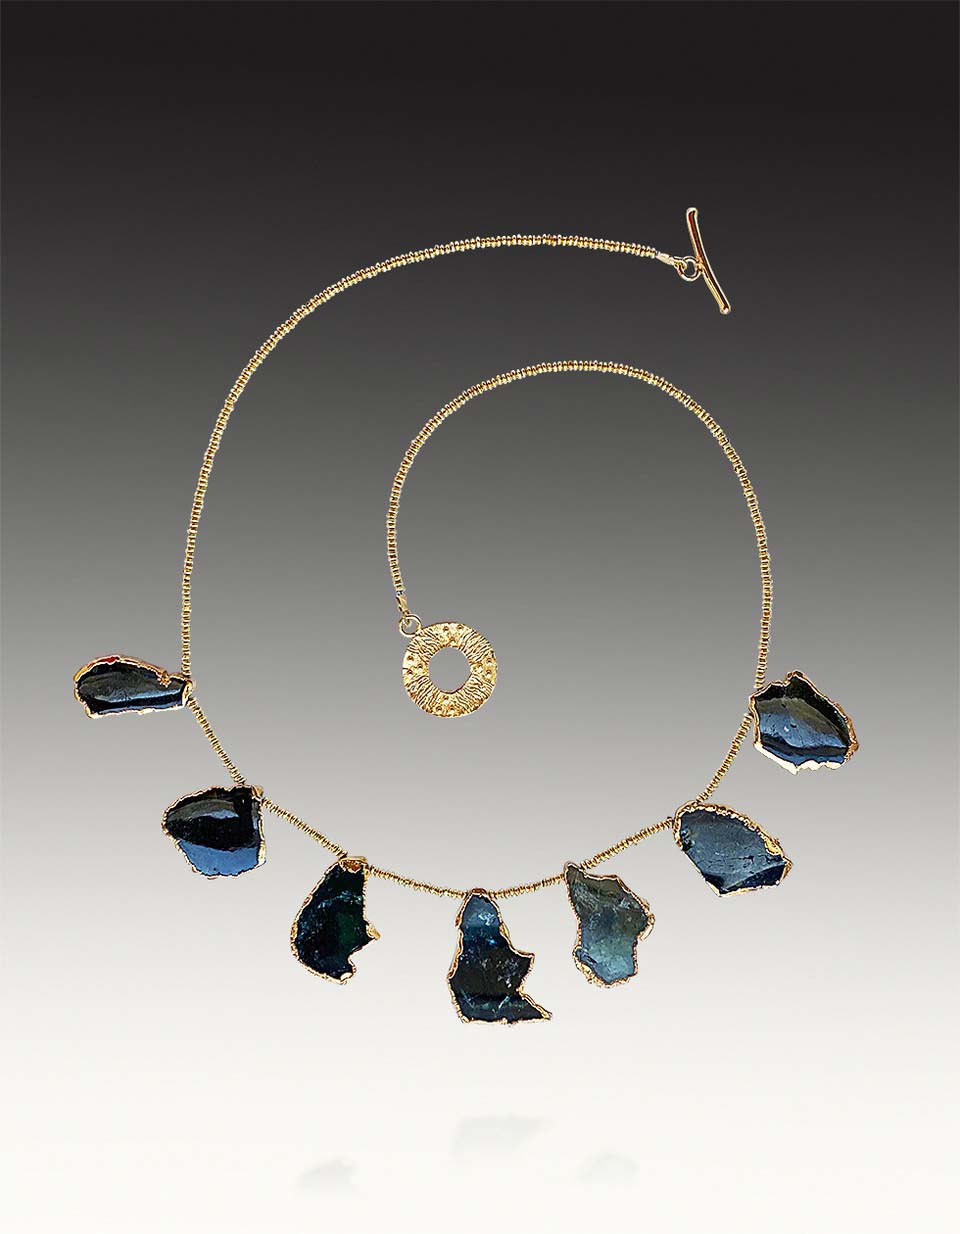 Bess Heitner: Gold-Trimmed Tourmaline Slice Necklace | Rendezvous Gallery